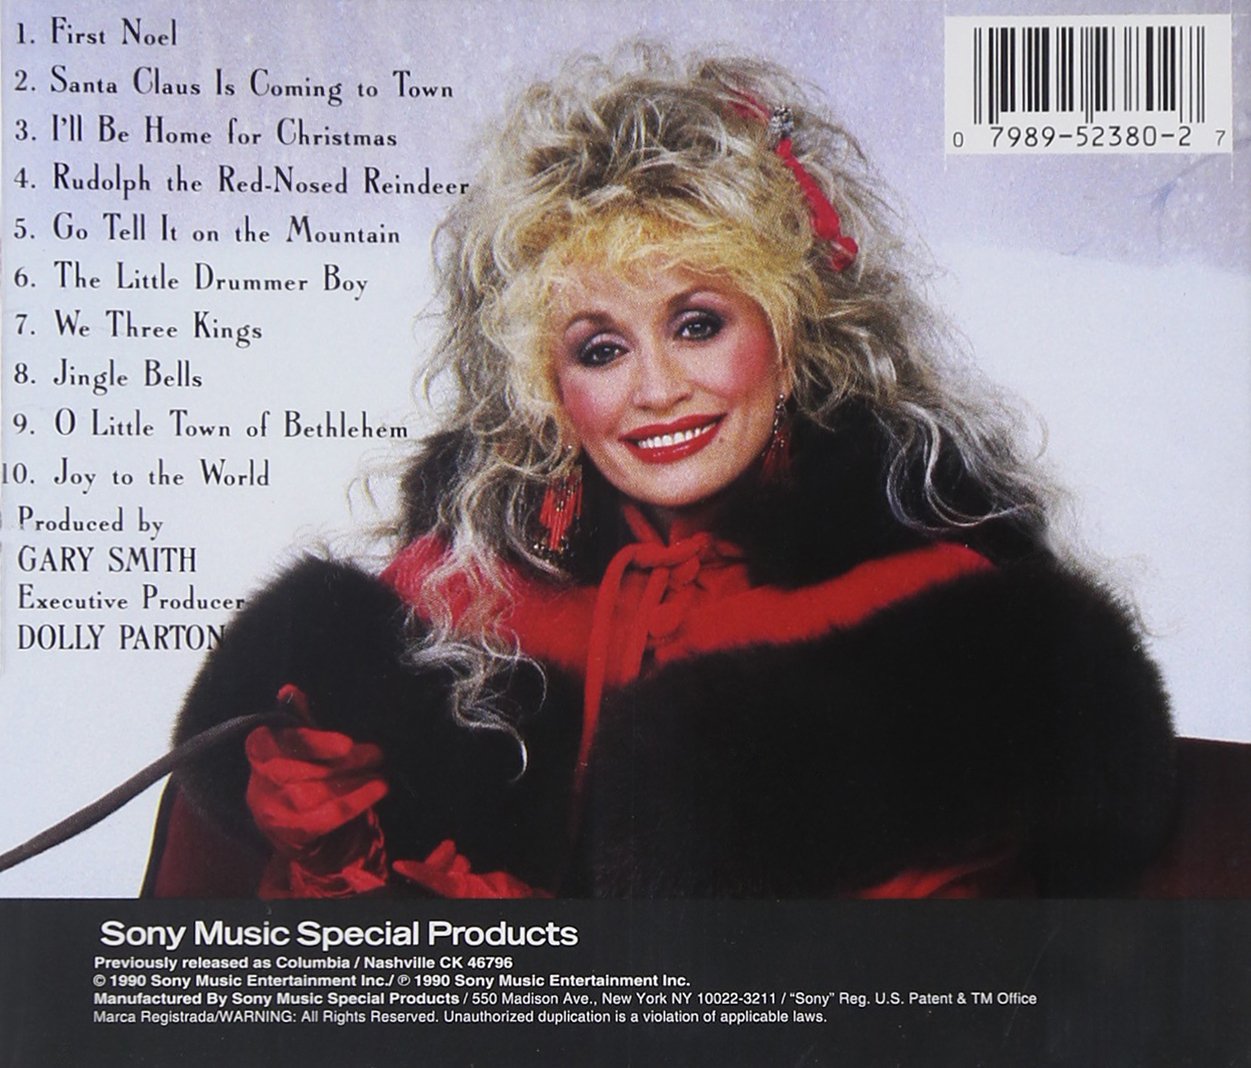 DOLLY PARTON: HOME FOR CHRISTMAS